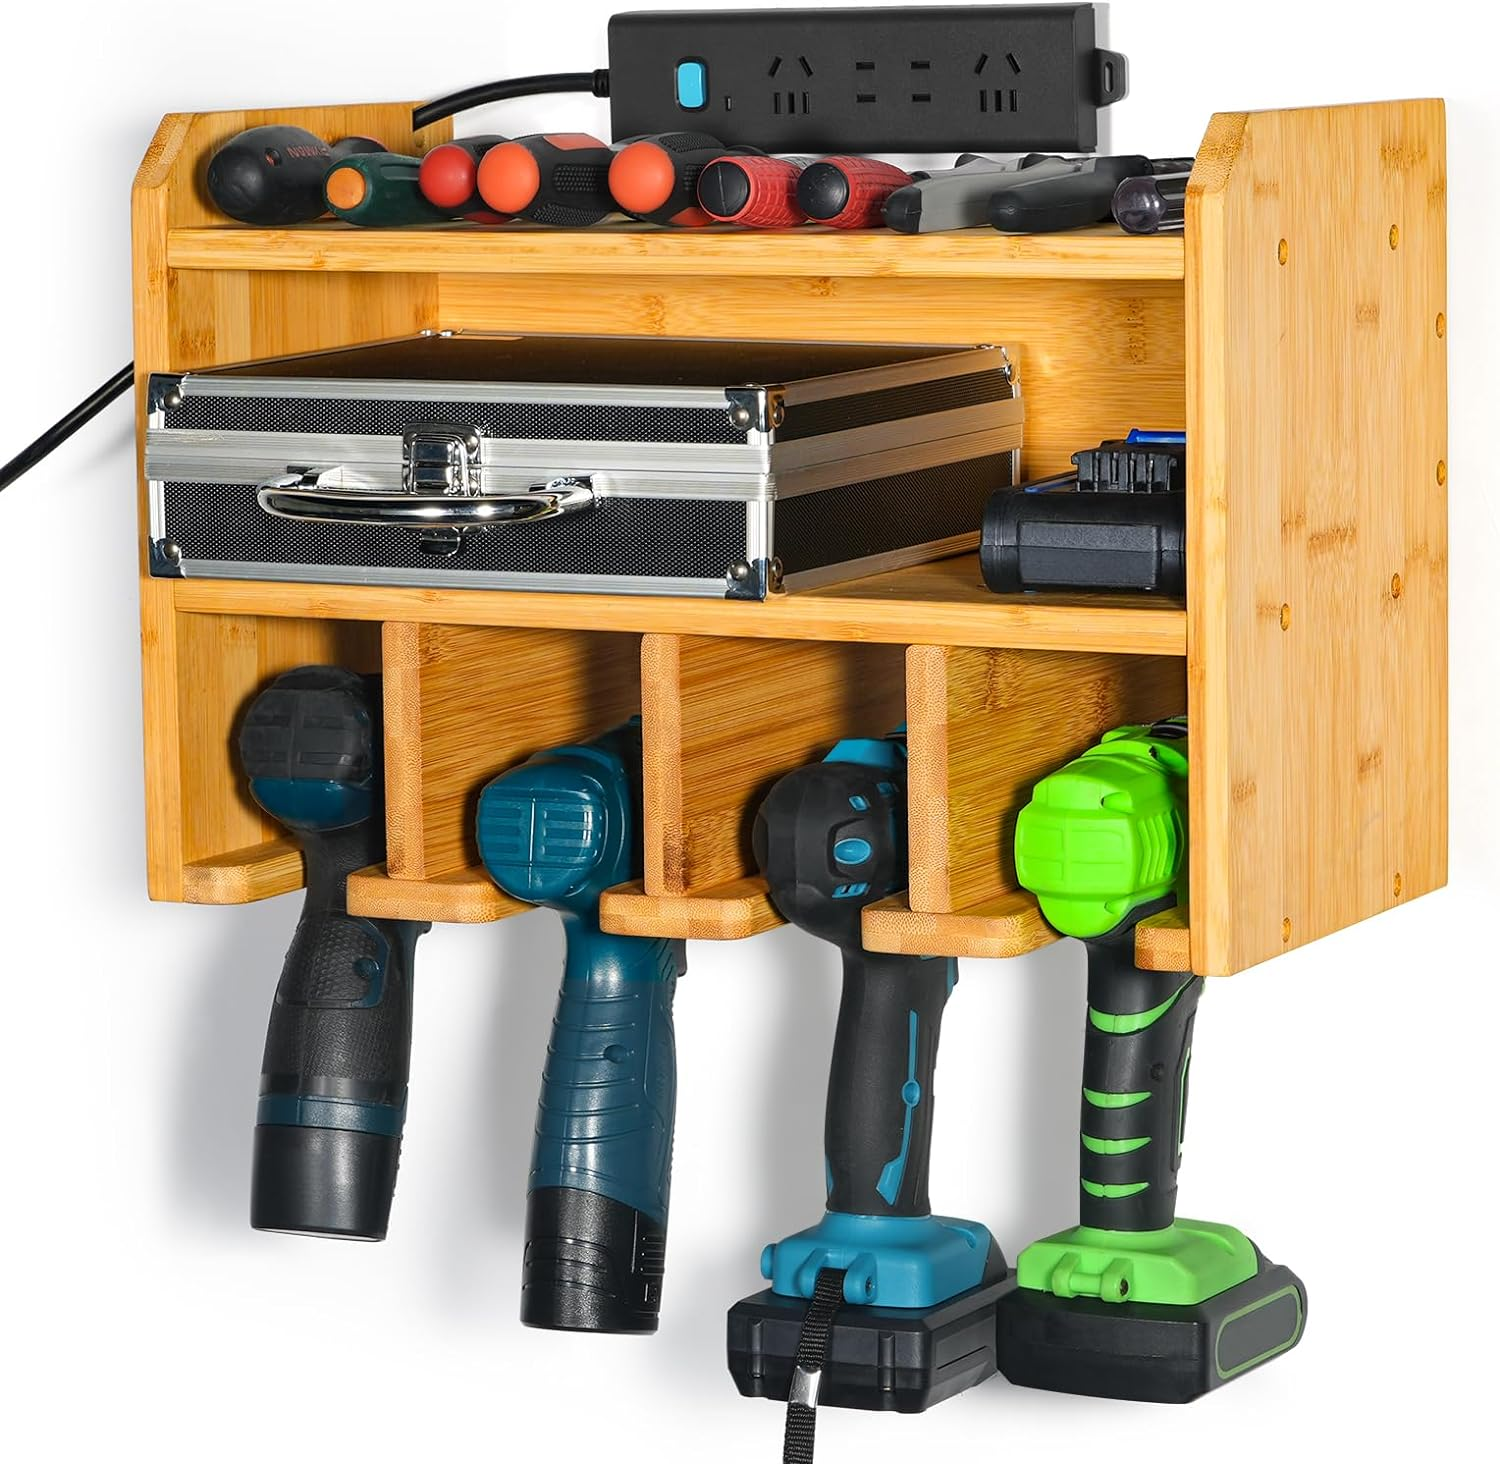 XSOURCE Power Tool Organizer With Charging Stations